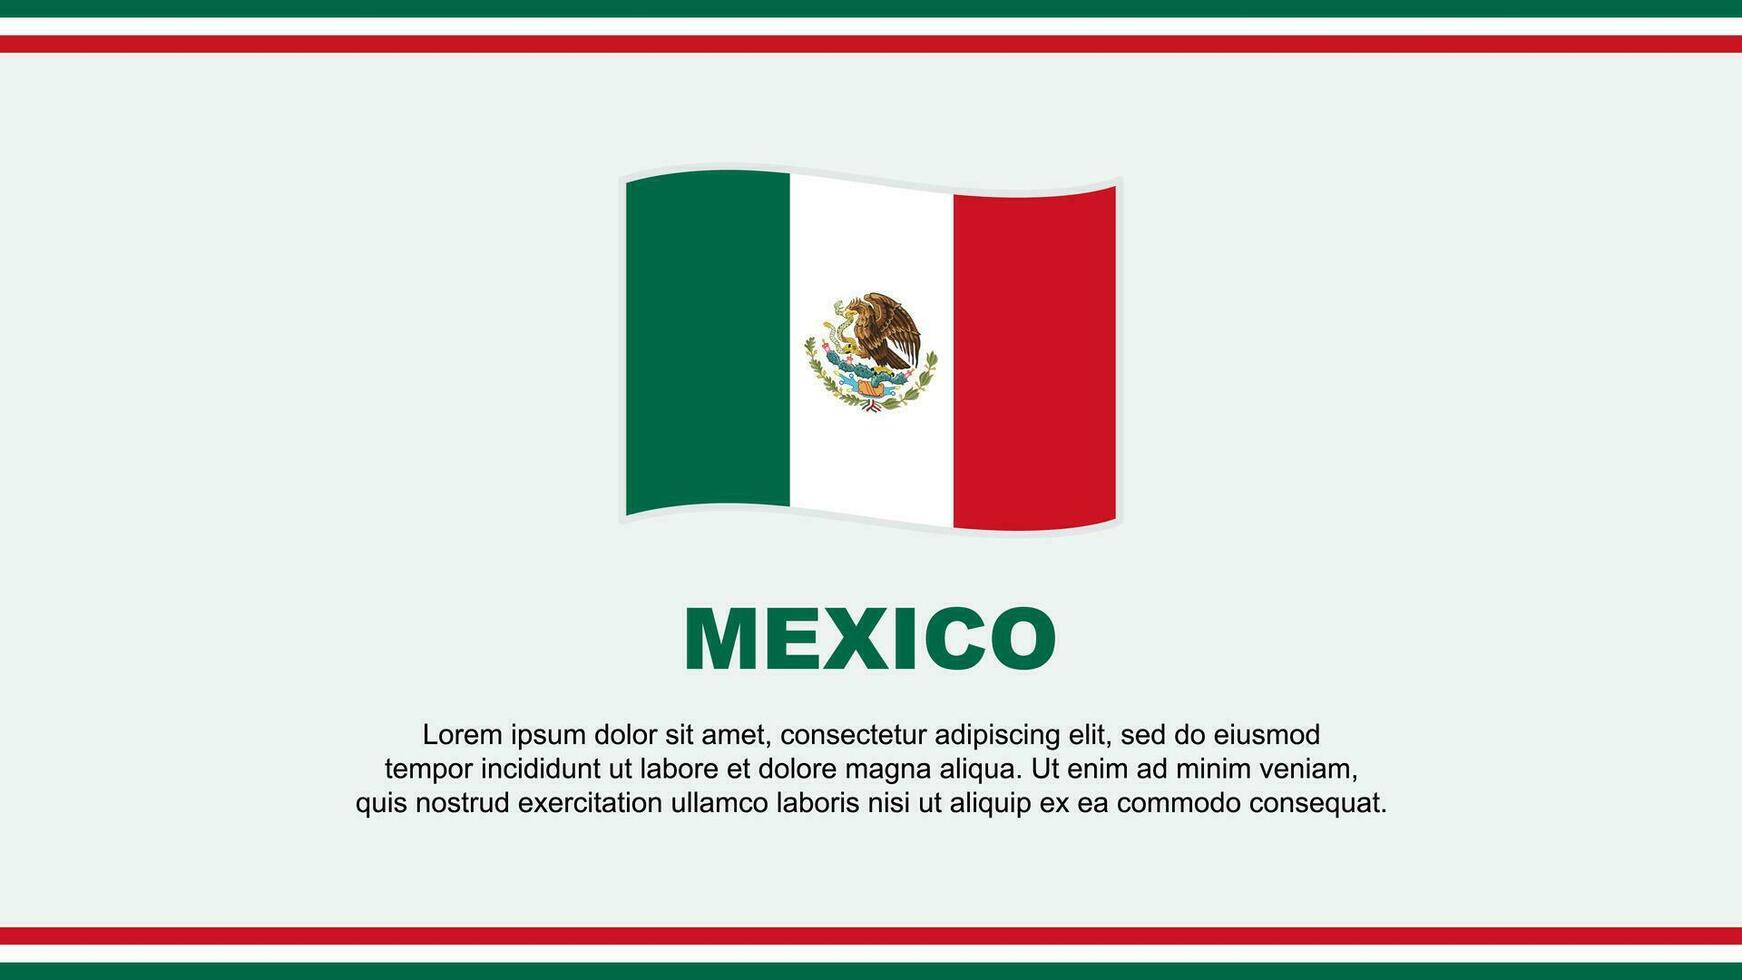 Mexico Flag Abstract Background Design Template. Mexico Independence Day Banner Social Media Vector Illustration. Mexico Design